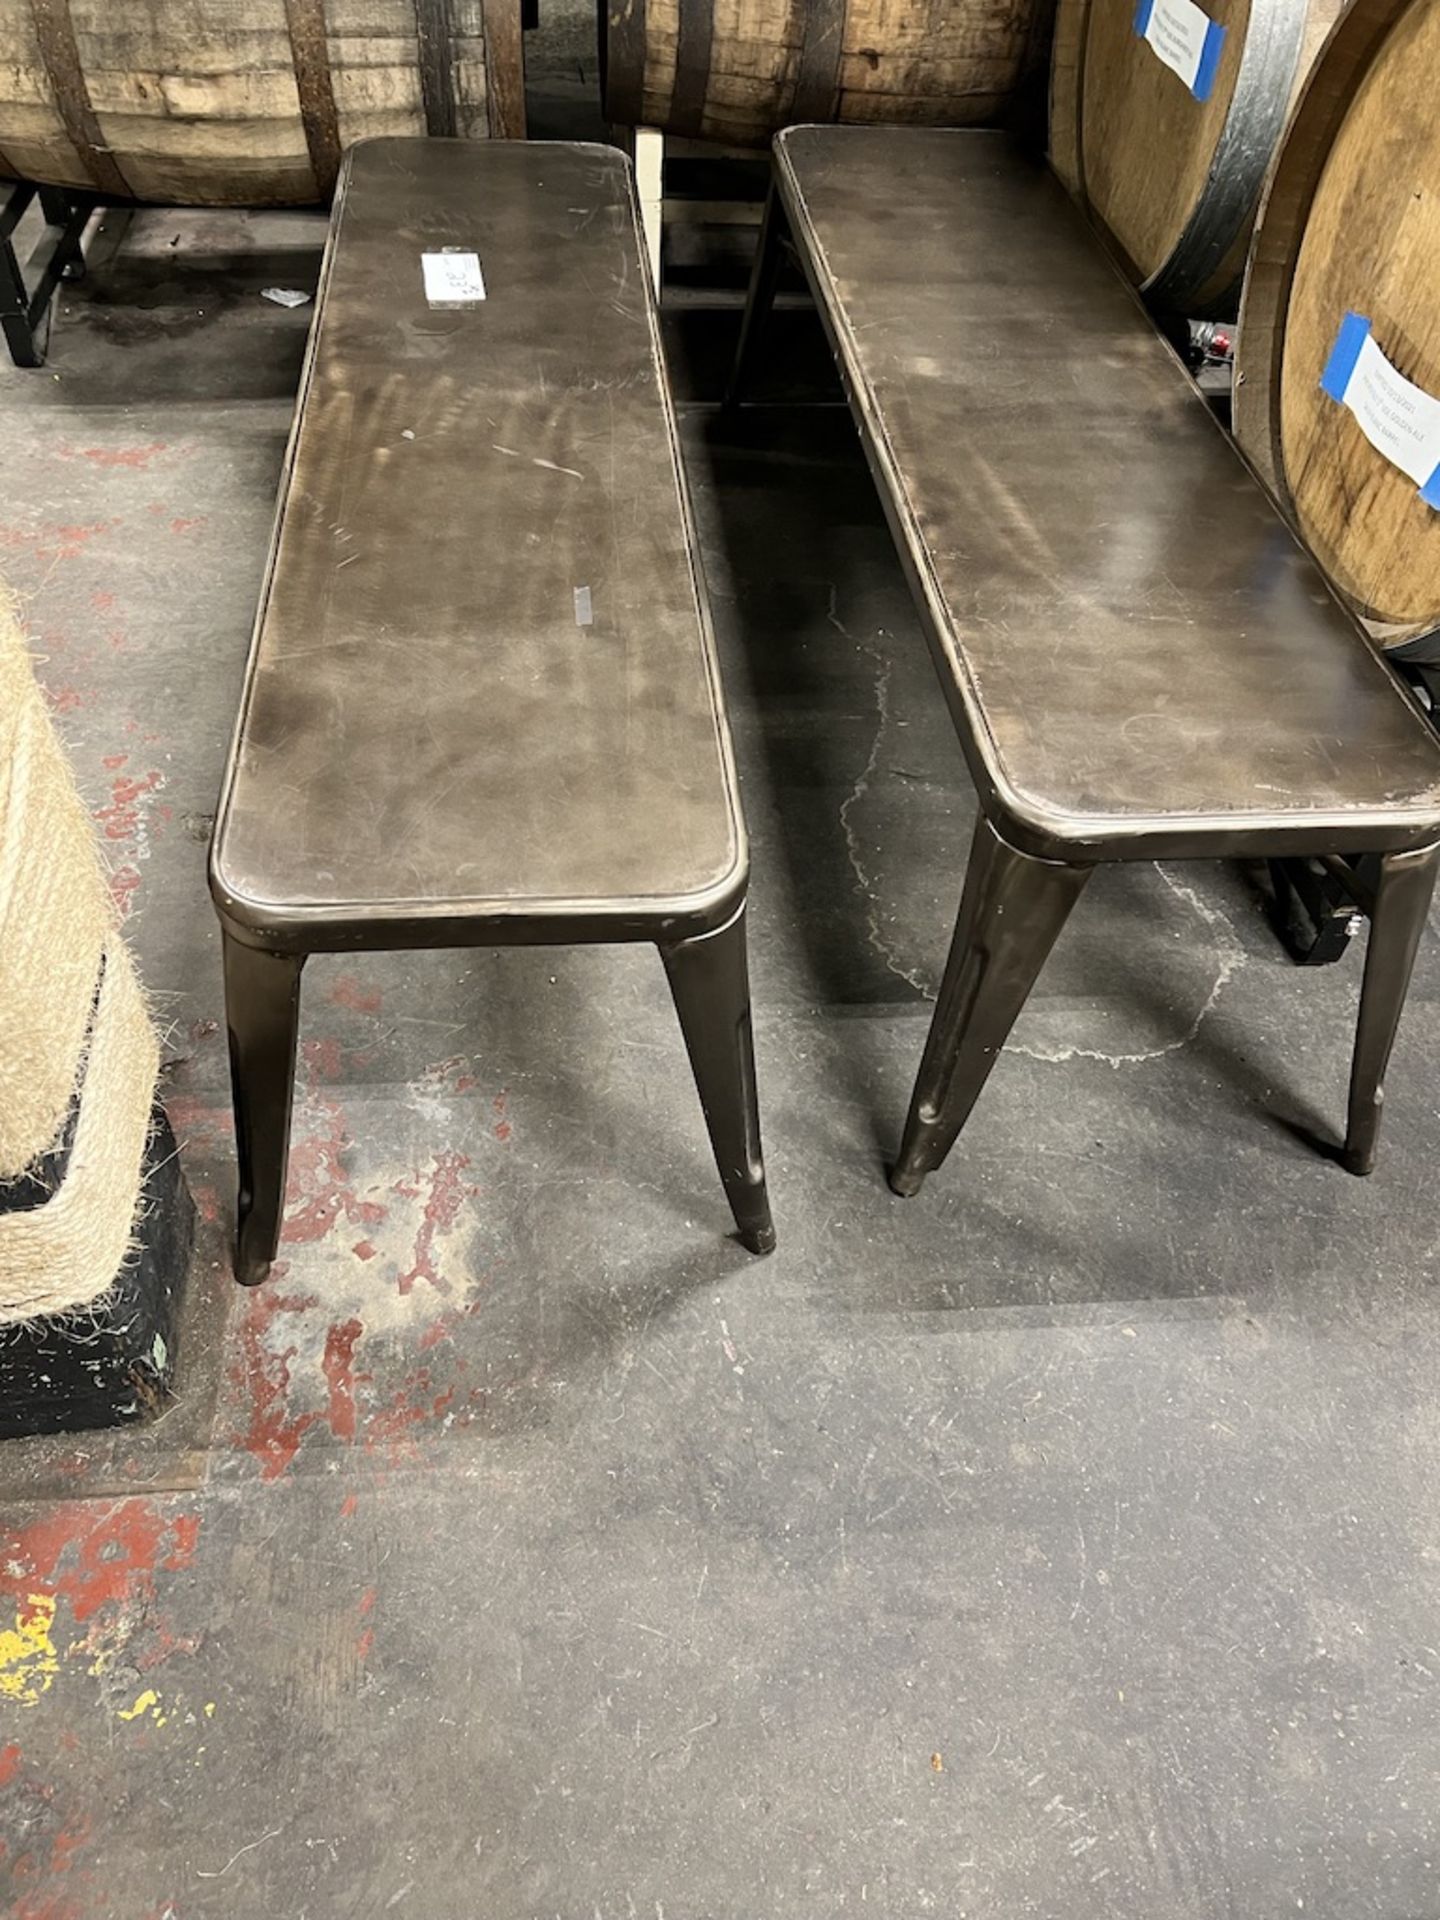 LOT OF: (2) 58" LONG METAL BENCHES